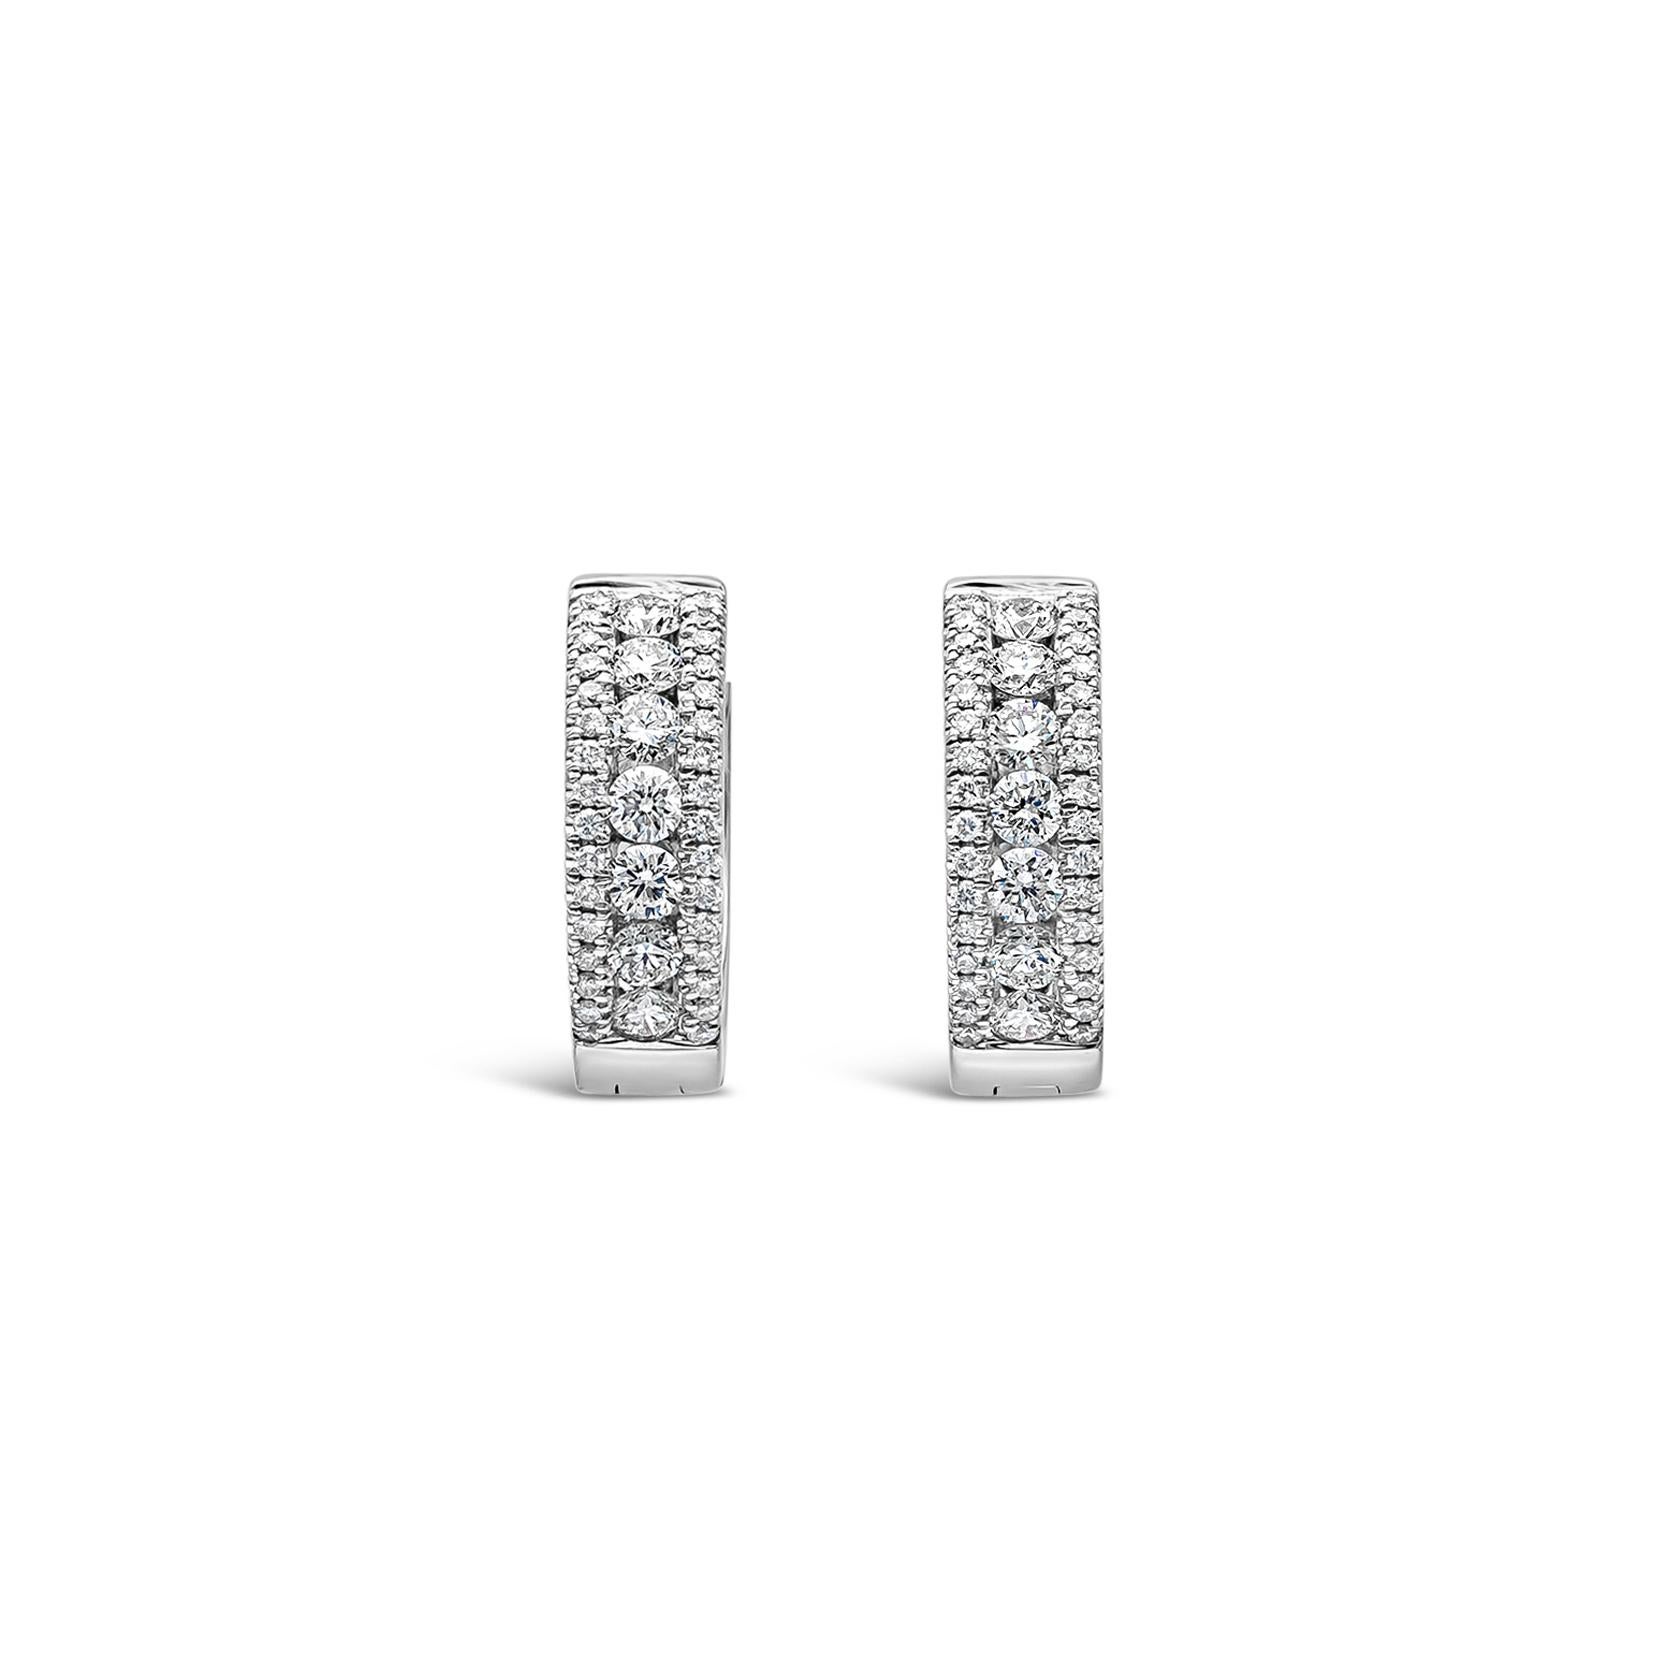 A stylish pair of huggie hoop earrings showcasing a row of round brilliant diamonds, set in an 18k white gold channel setting accented with round melee diamonds. Diamonds weigh 0.63 carats total, F color, VS-SI in clarity.

Roman Malakov is a custom